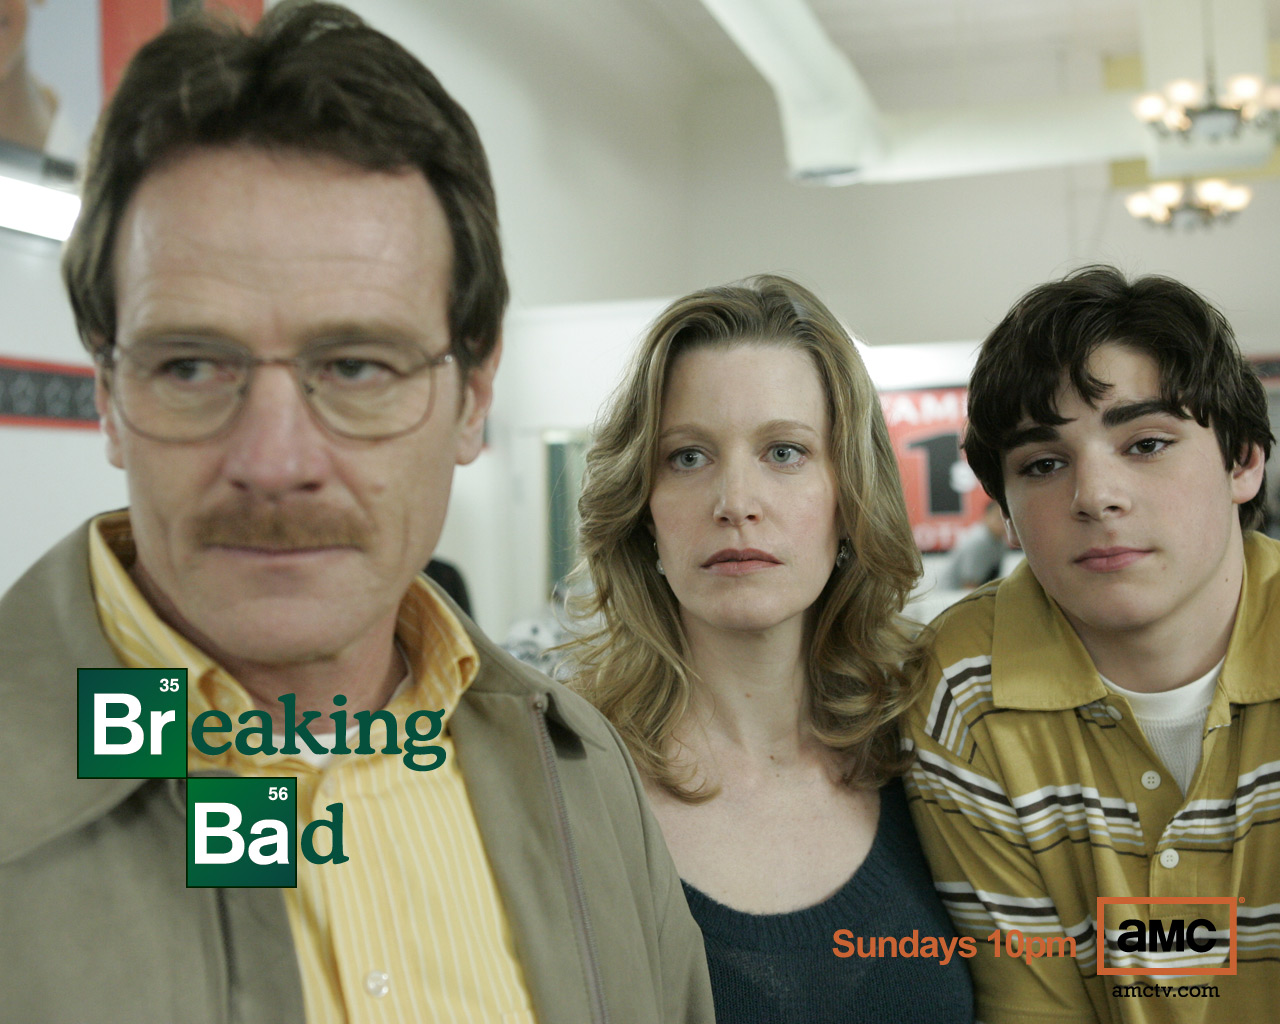 Download High quality A Breaking Bad wallpaper / TV Serials / 1280x1024